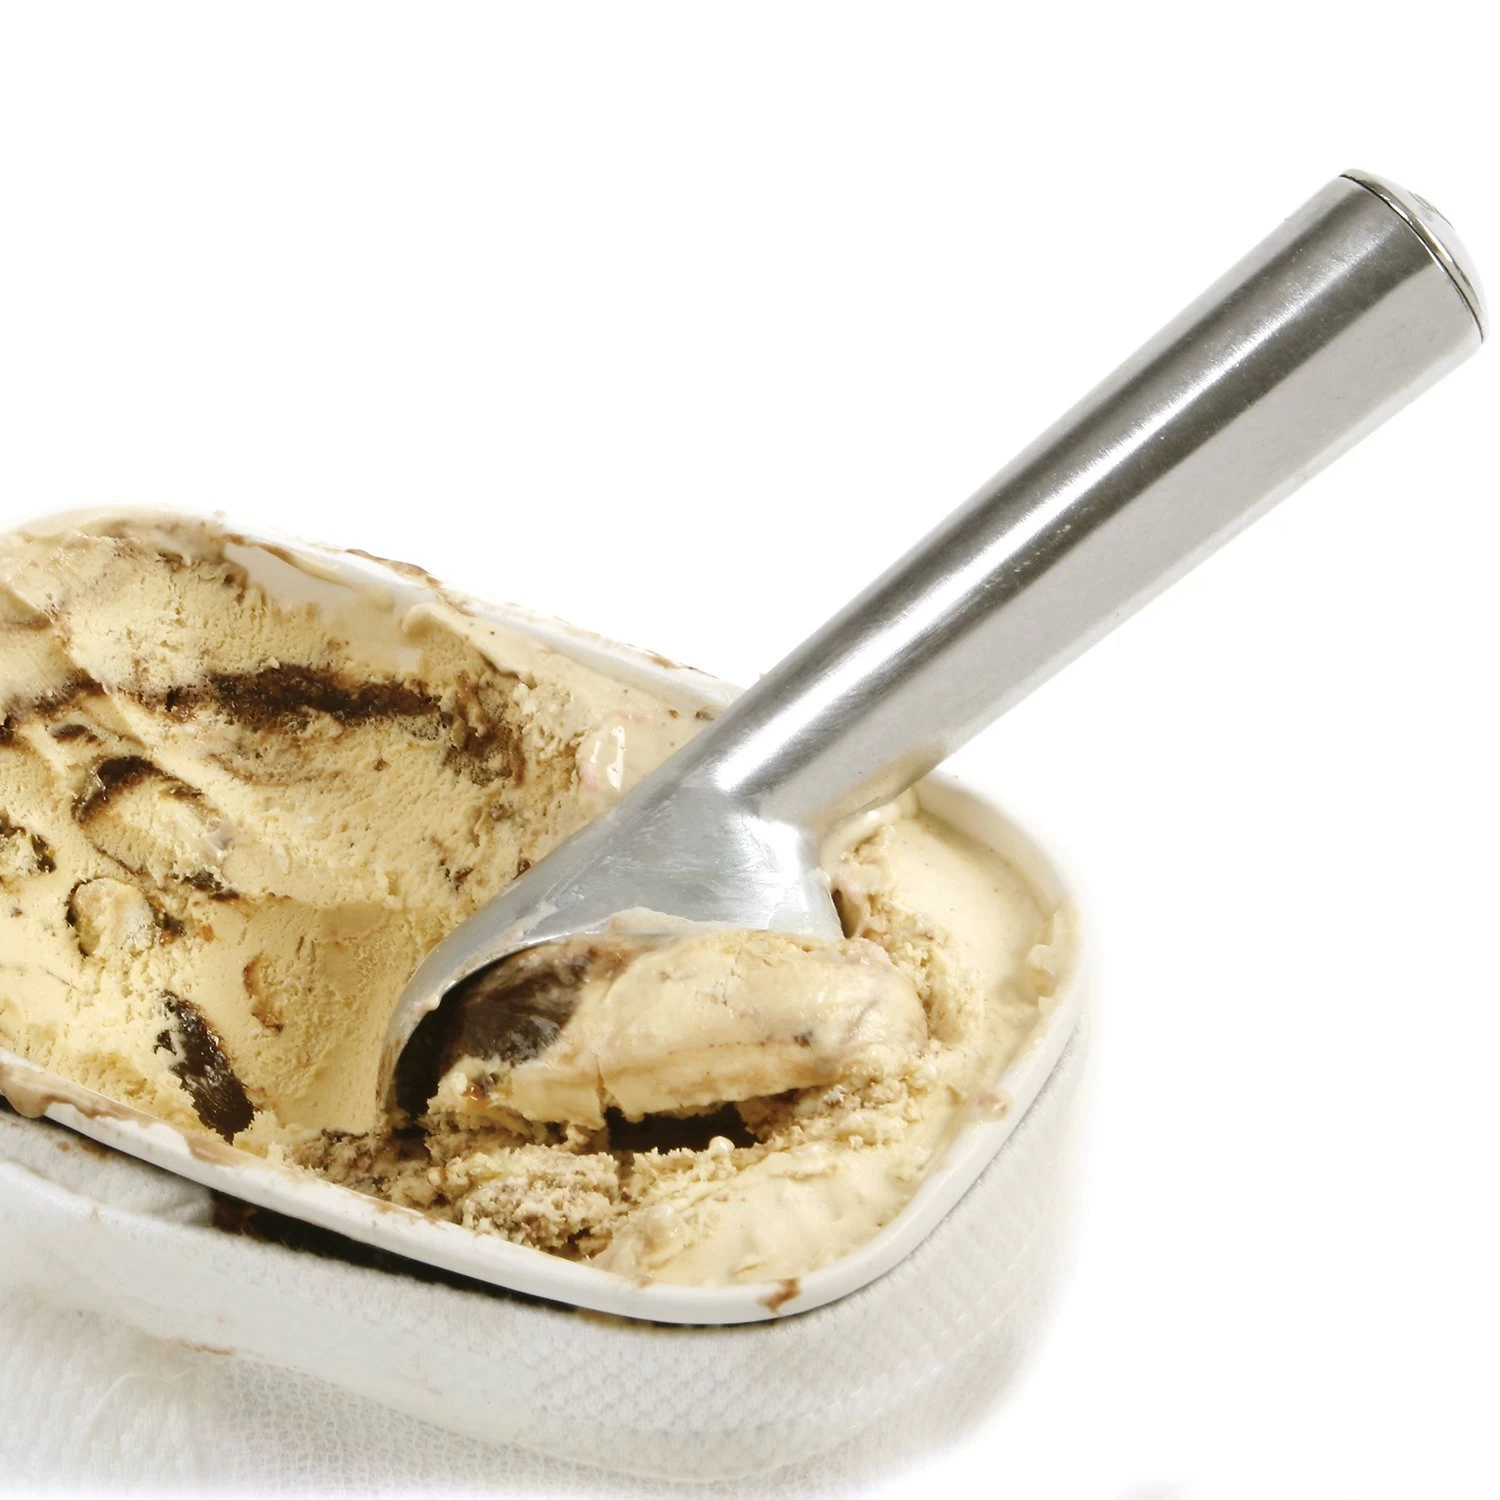 Stainless Steel Ice Cream Spoon in china, Stainless Steel Ice Cream Scooptrading